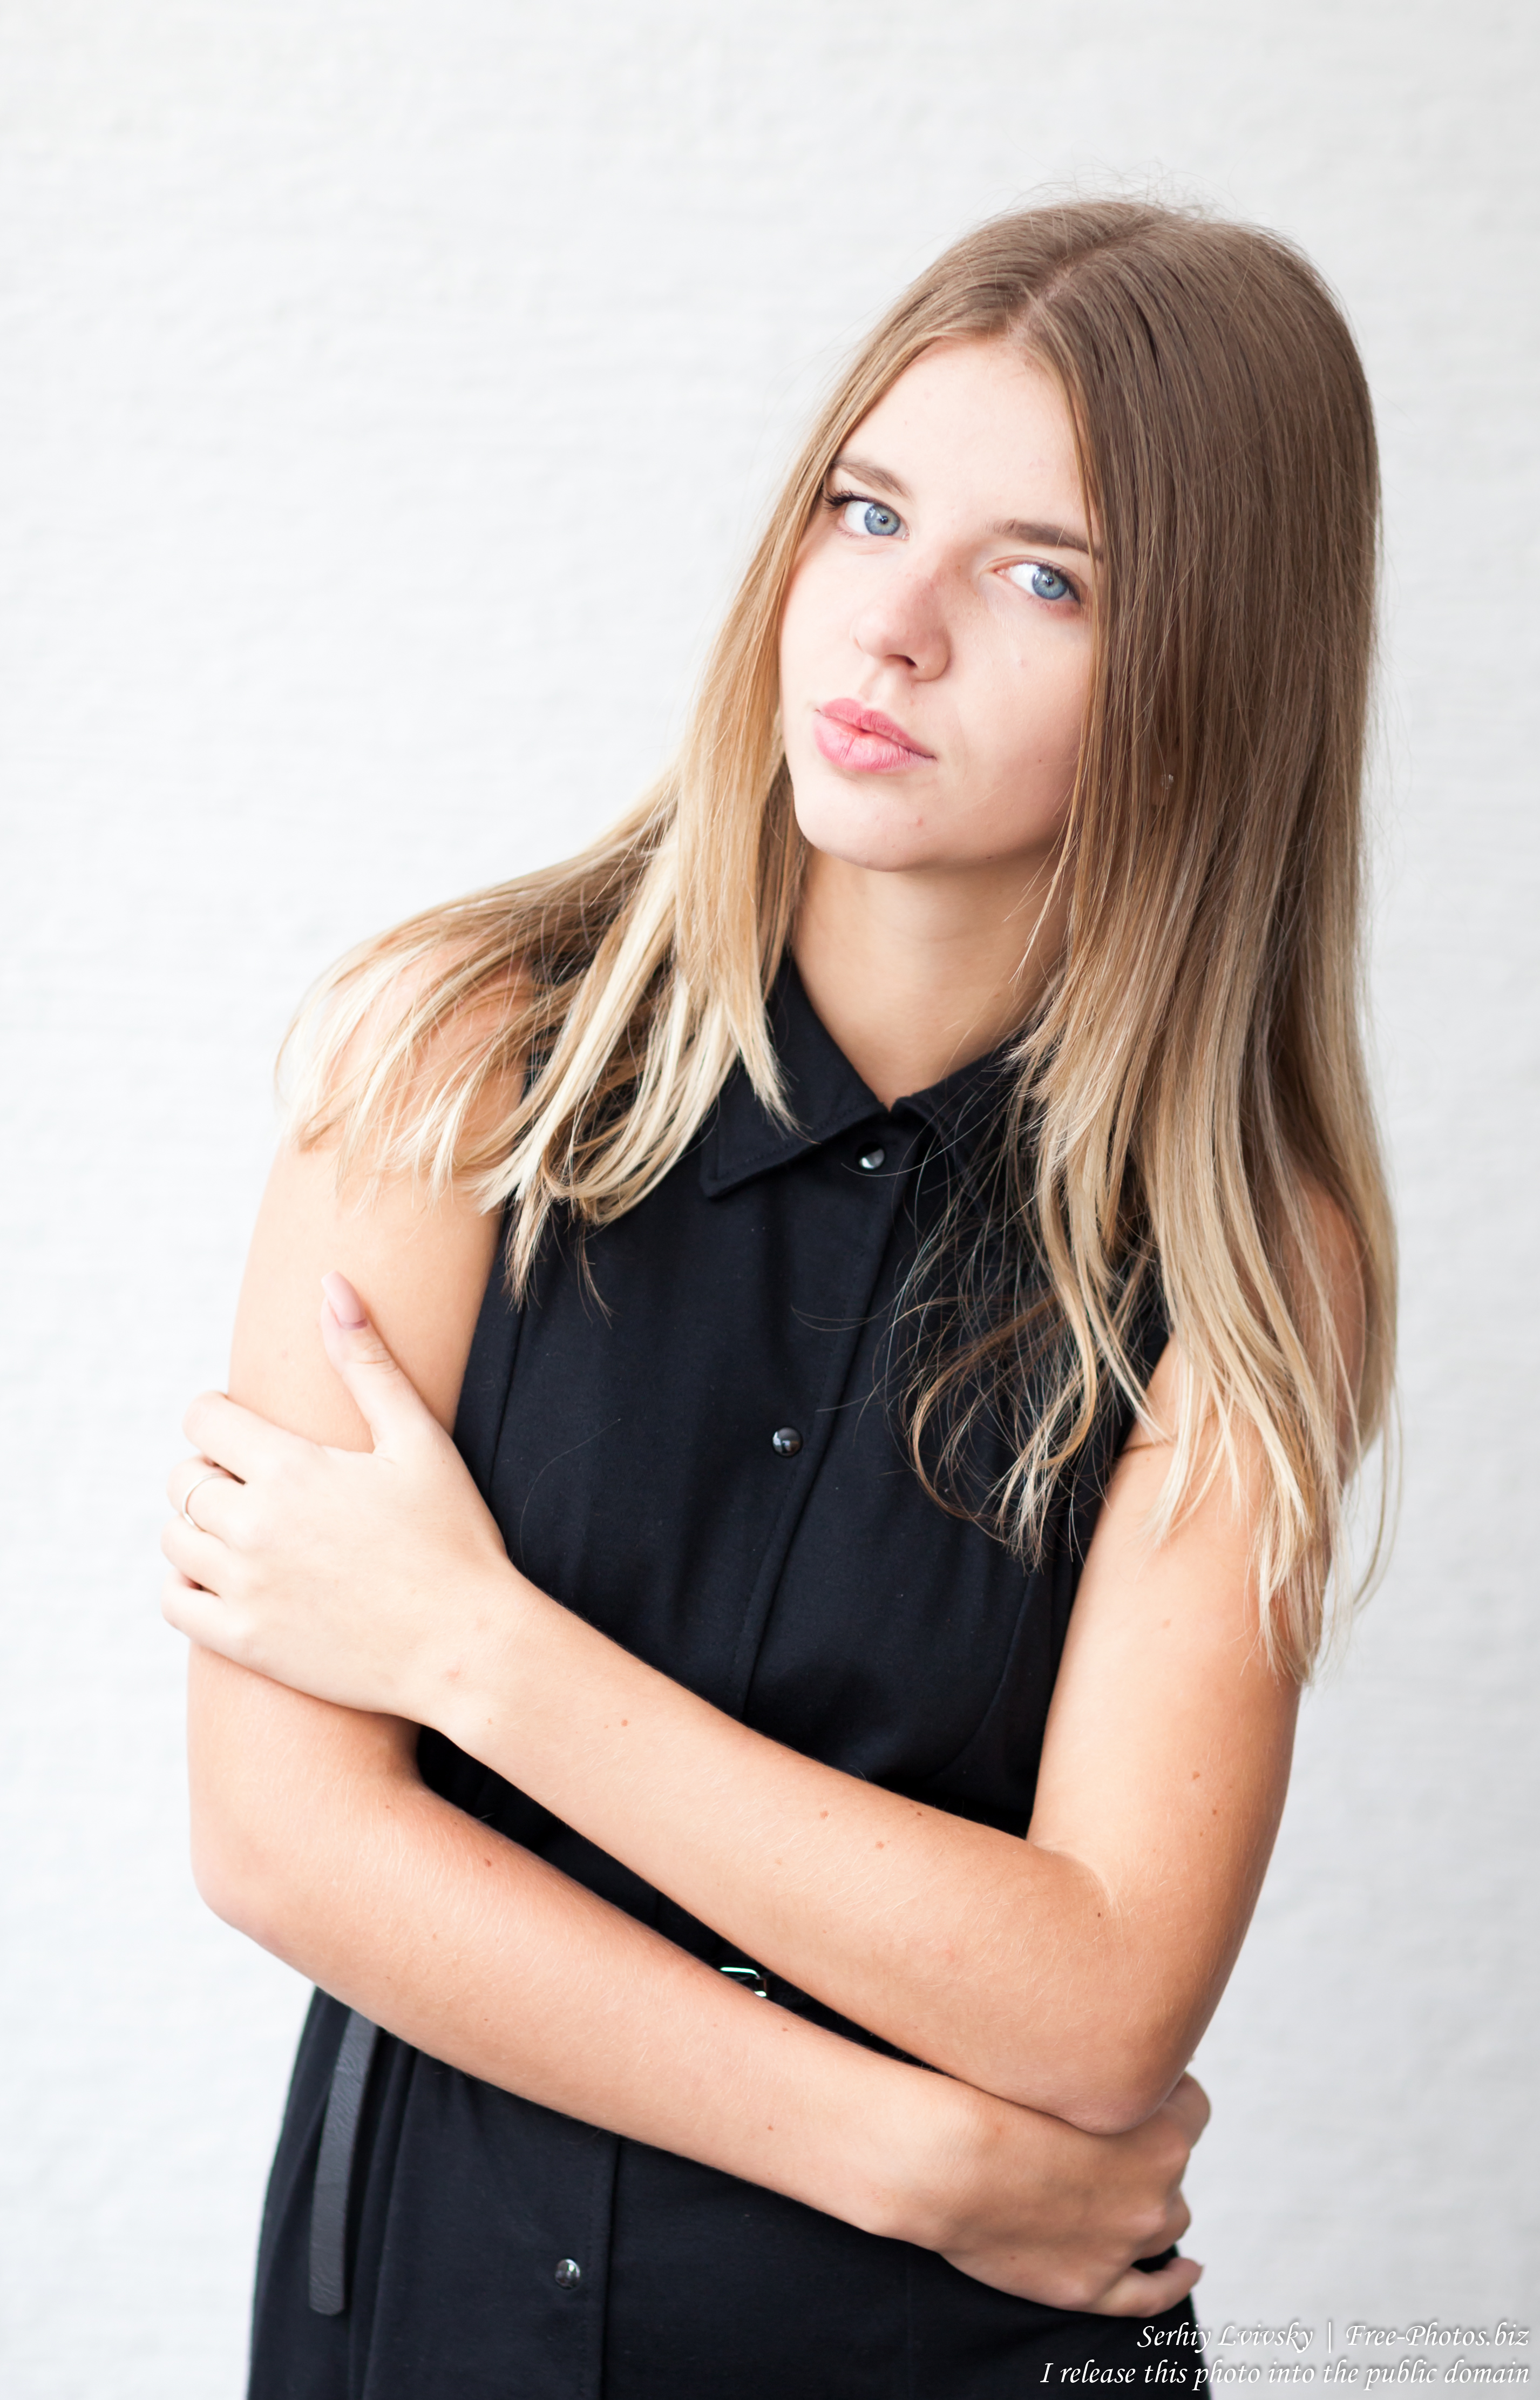 an 18-year-old natural blond girl photographed in September 2016 by Serhiy Lvivsky, picture 1